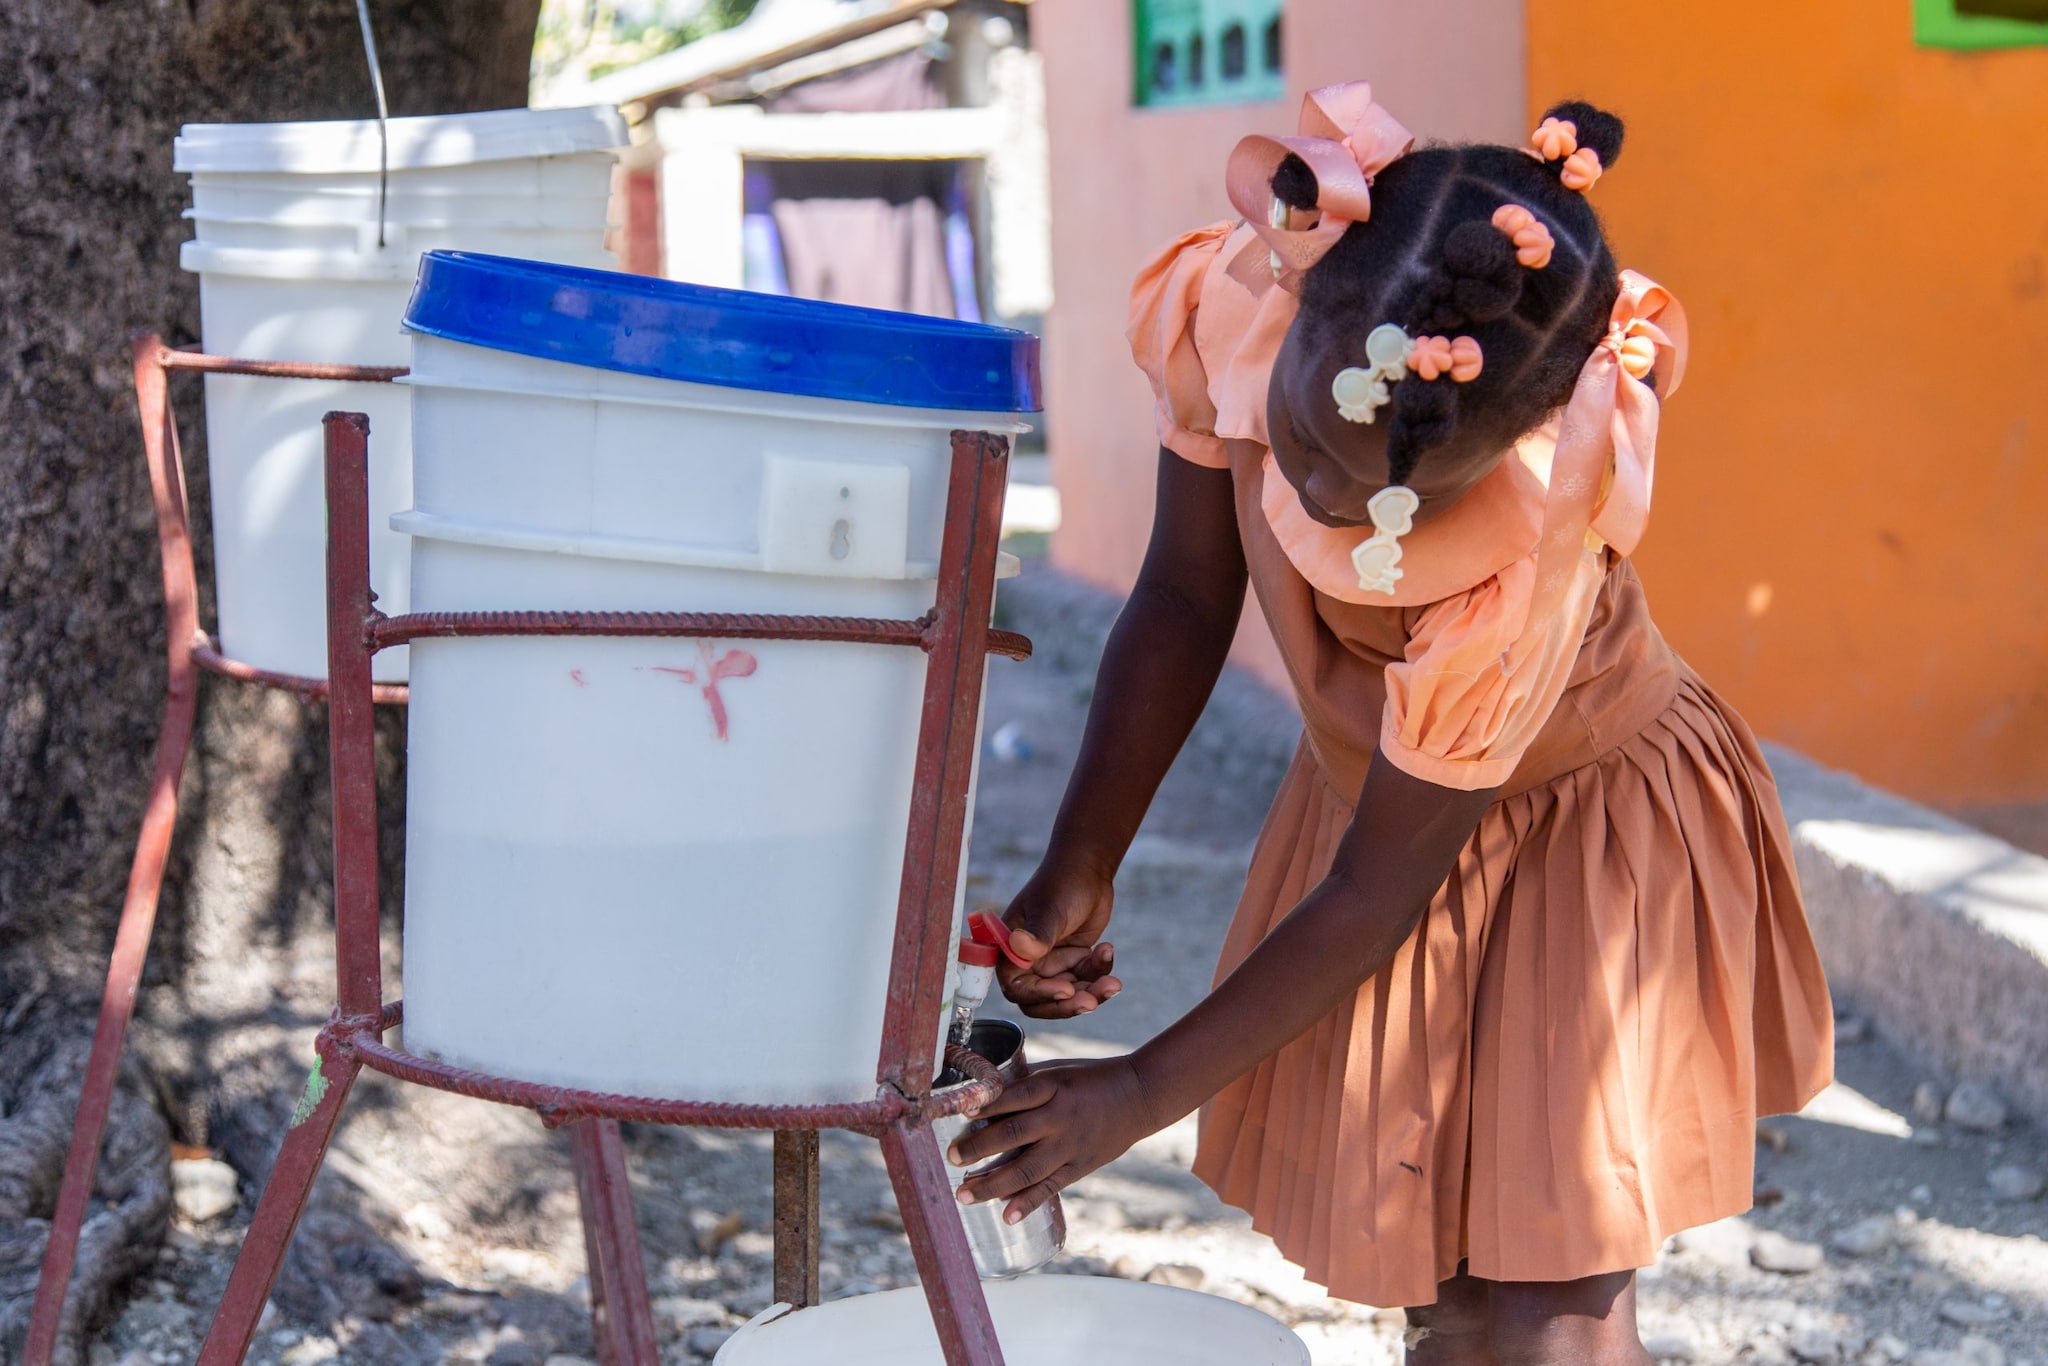 Young girl in Haiti fills her glass with clean water from a container